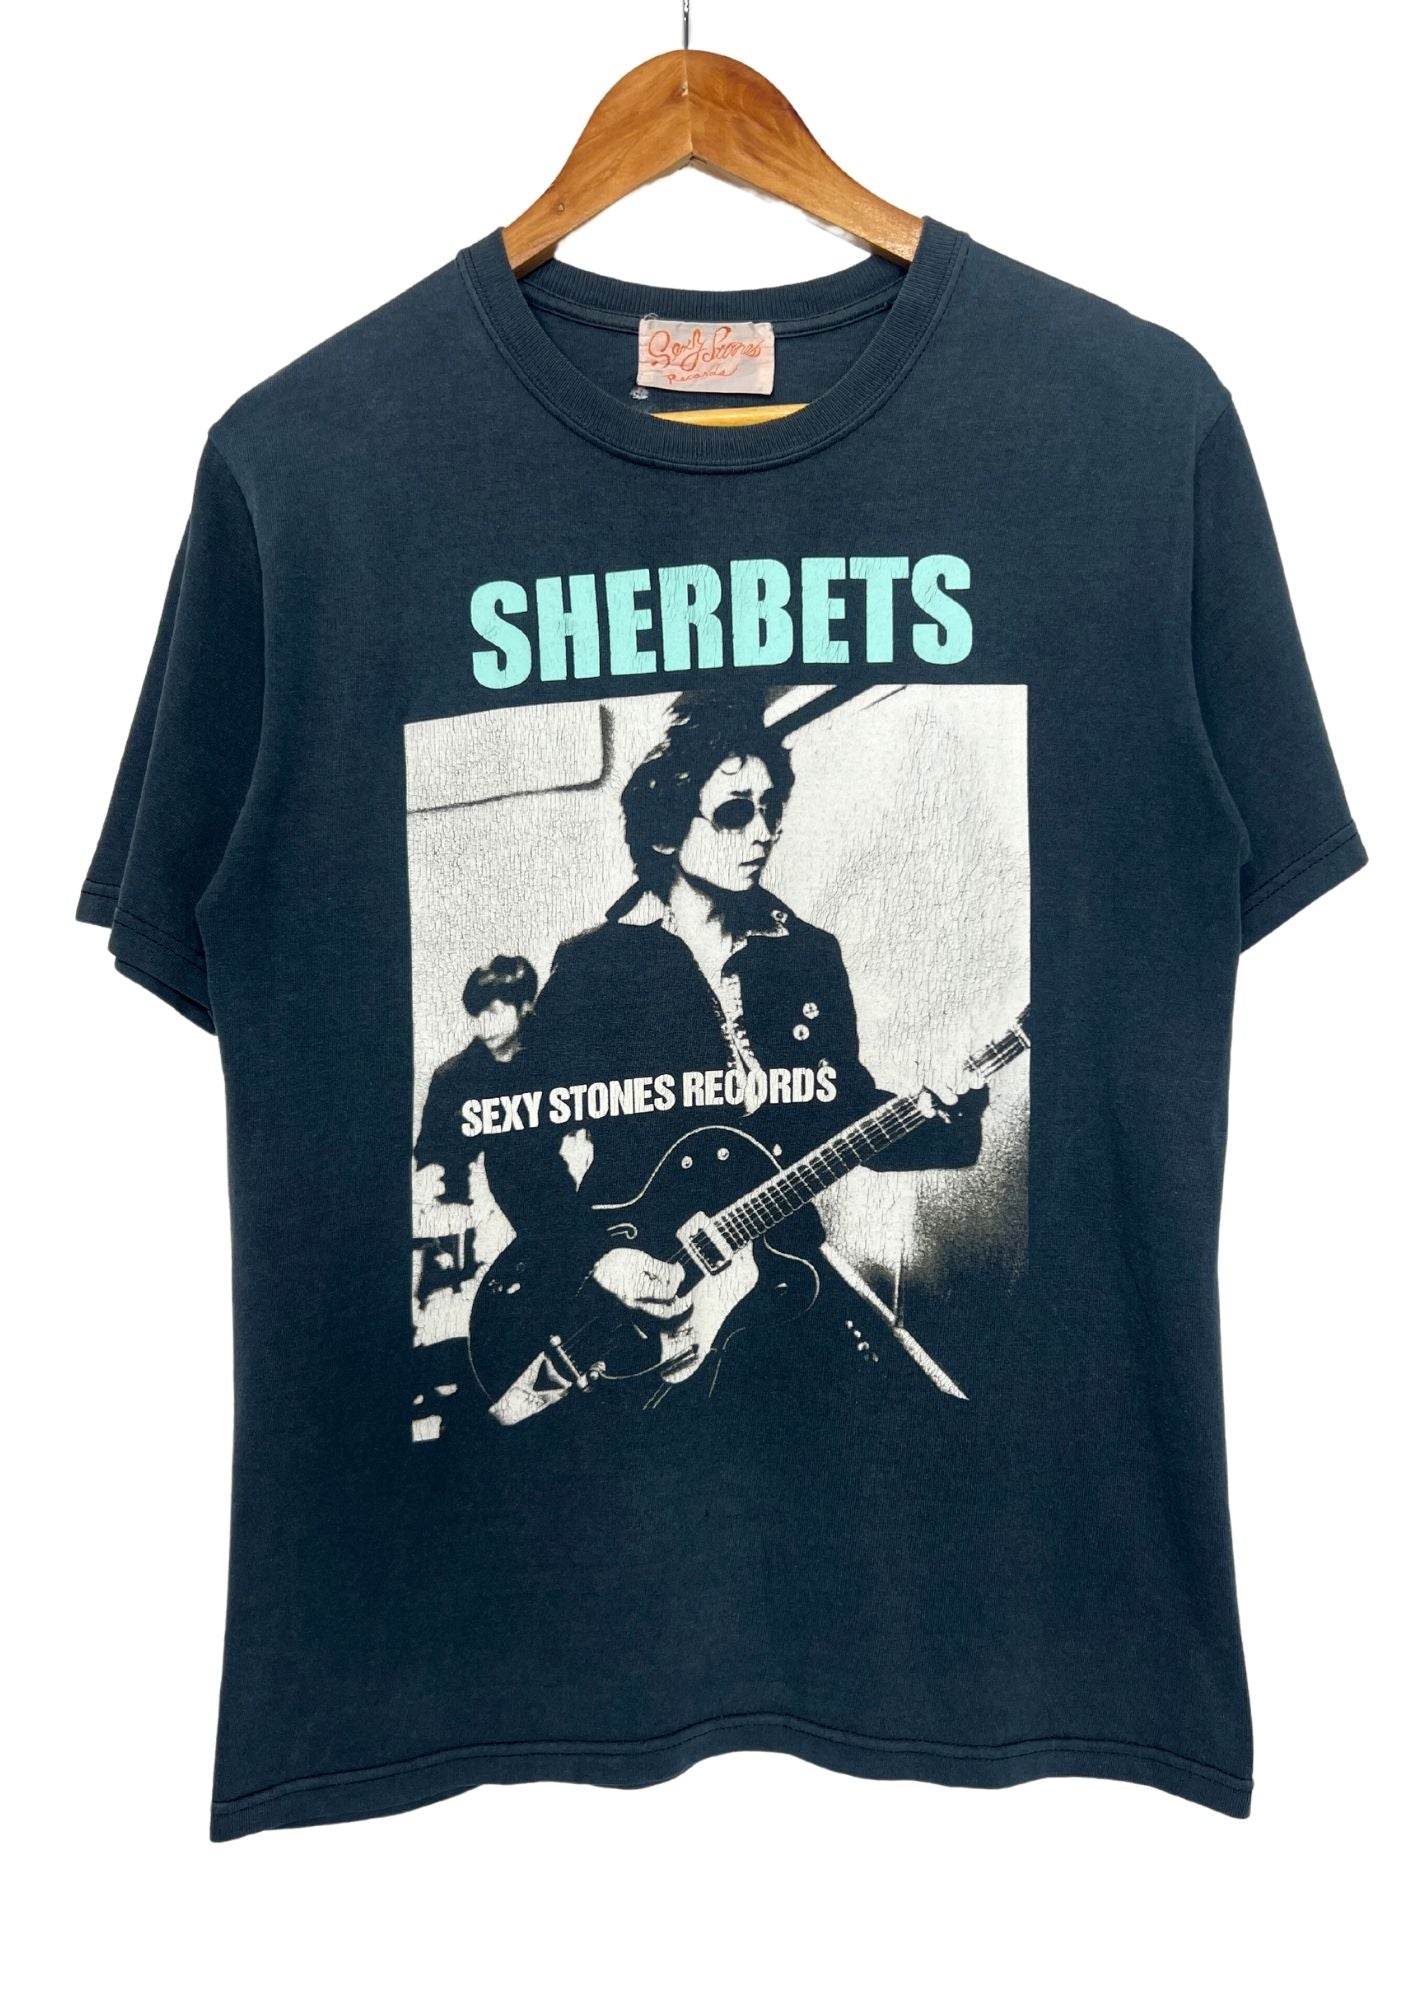 2000 SHERBETS 'Sexy Stones Records' Japanese Band T-shirt